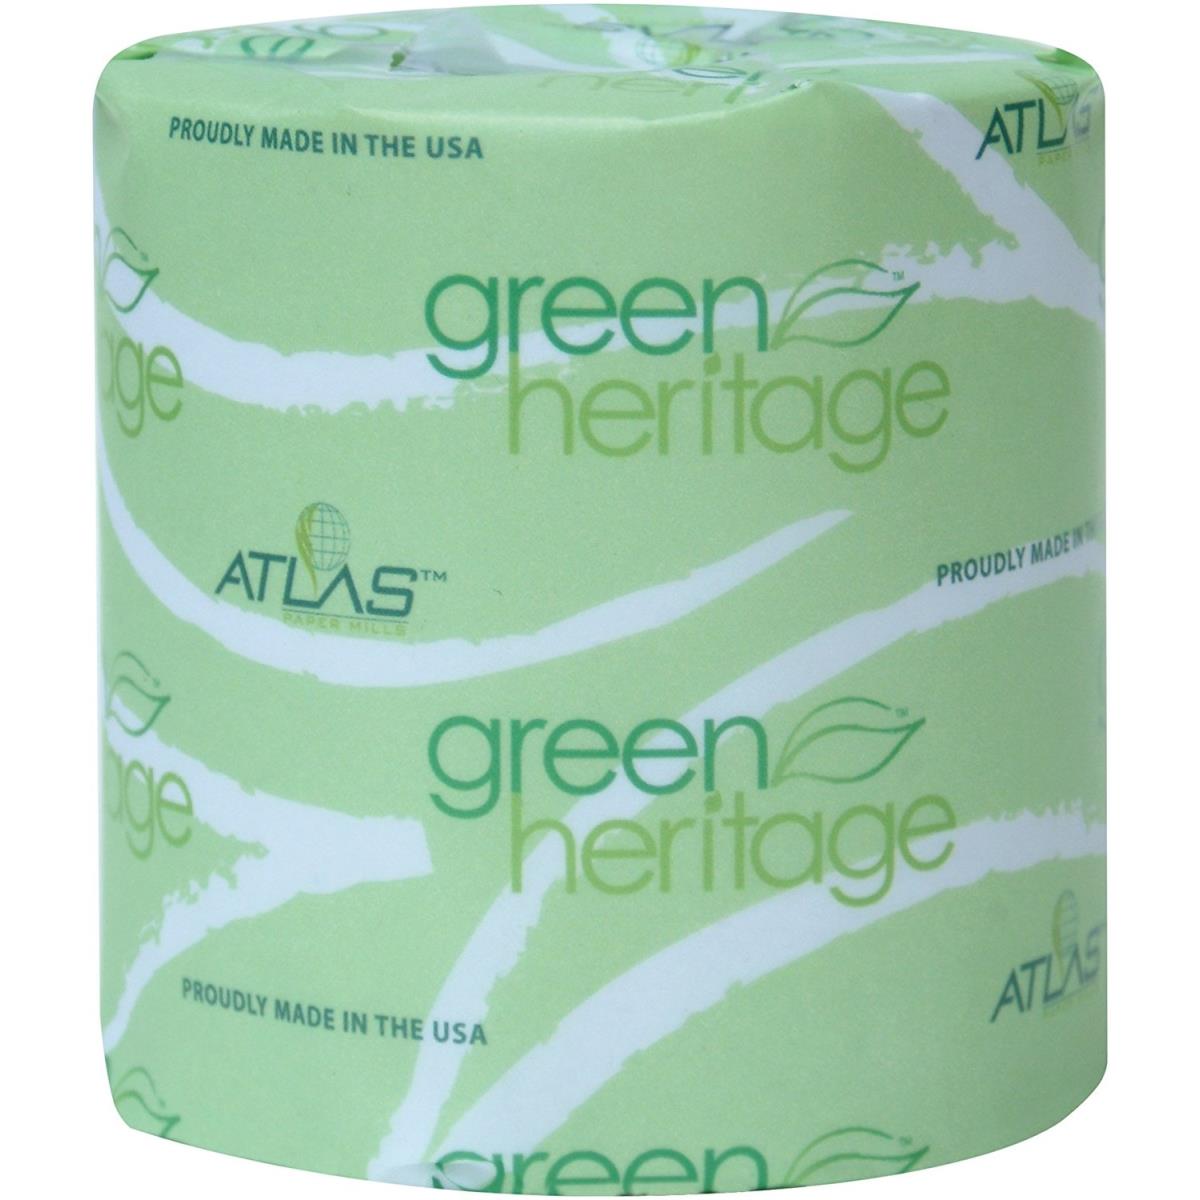 Picture of Atlas Paper 248 PE 248 in. White 2ply Green Heritage Bathroom Tissue - Pack of 96